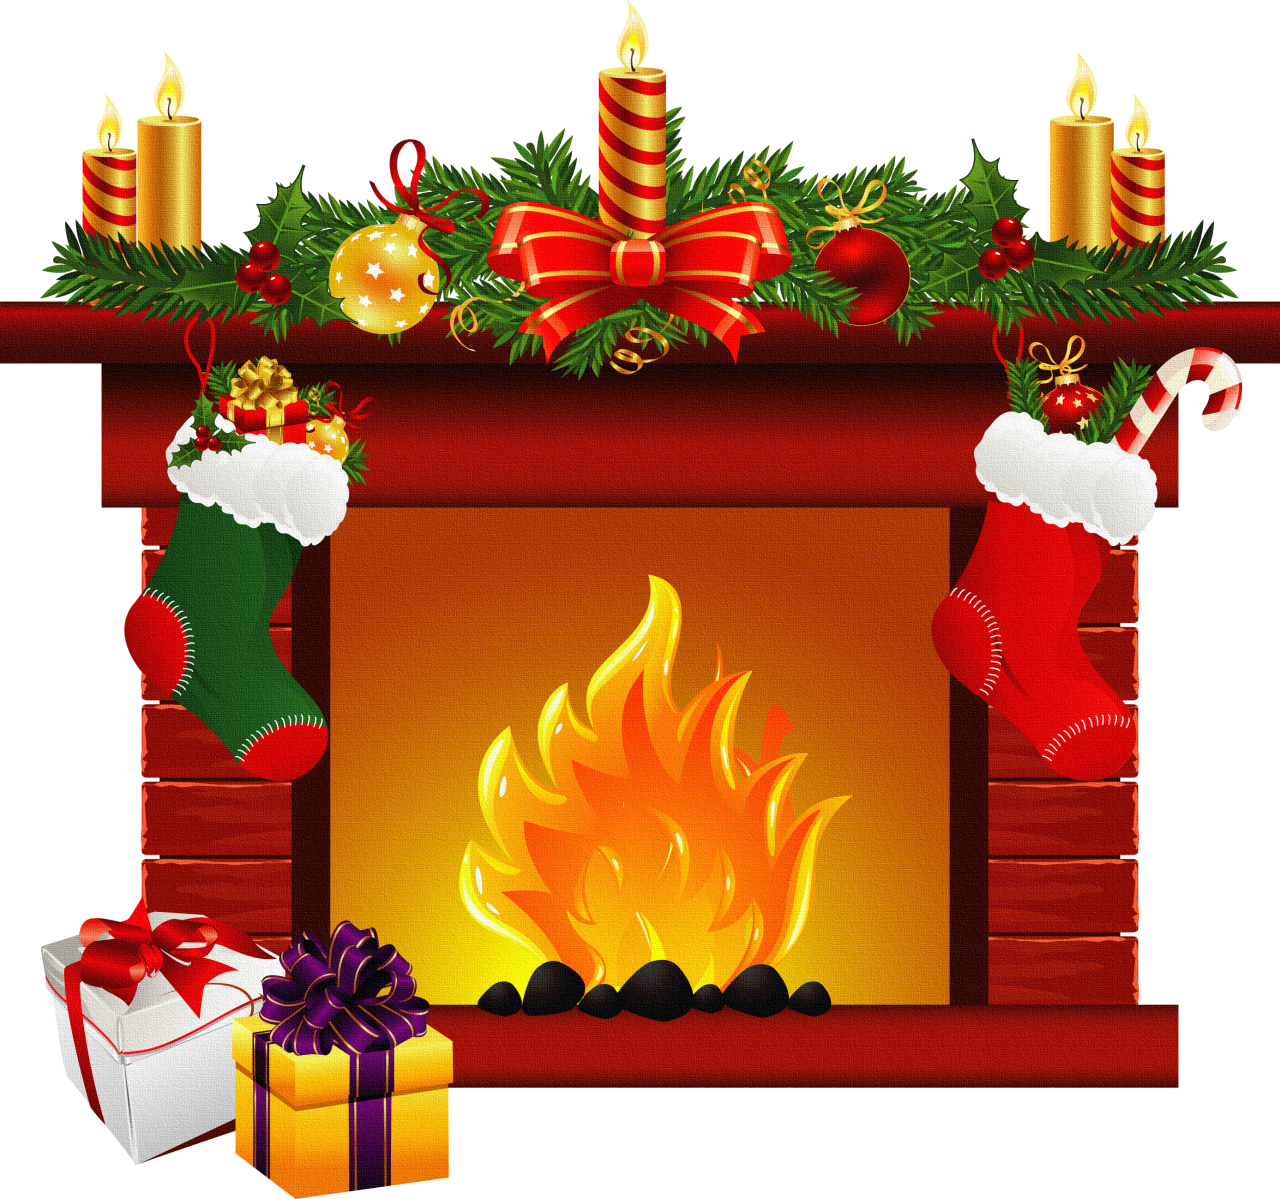 Fireplace Clip Art - Images, Illustrations, Photos